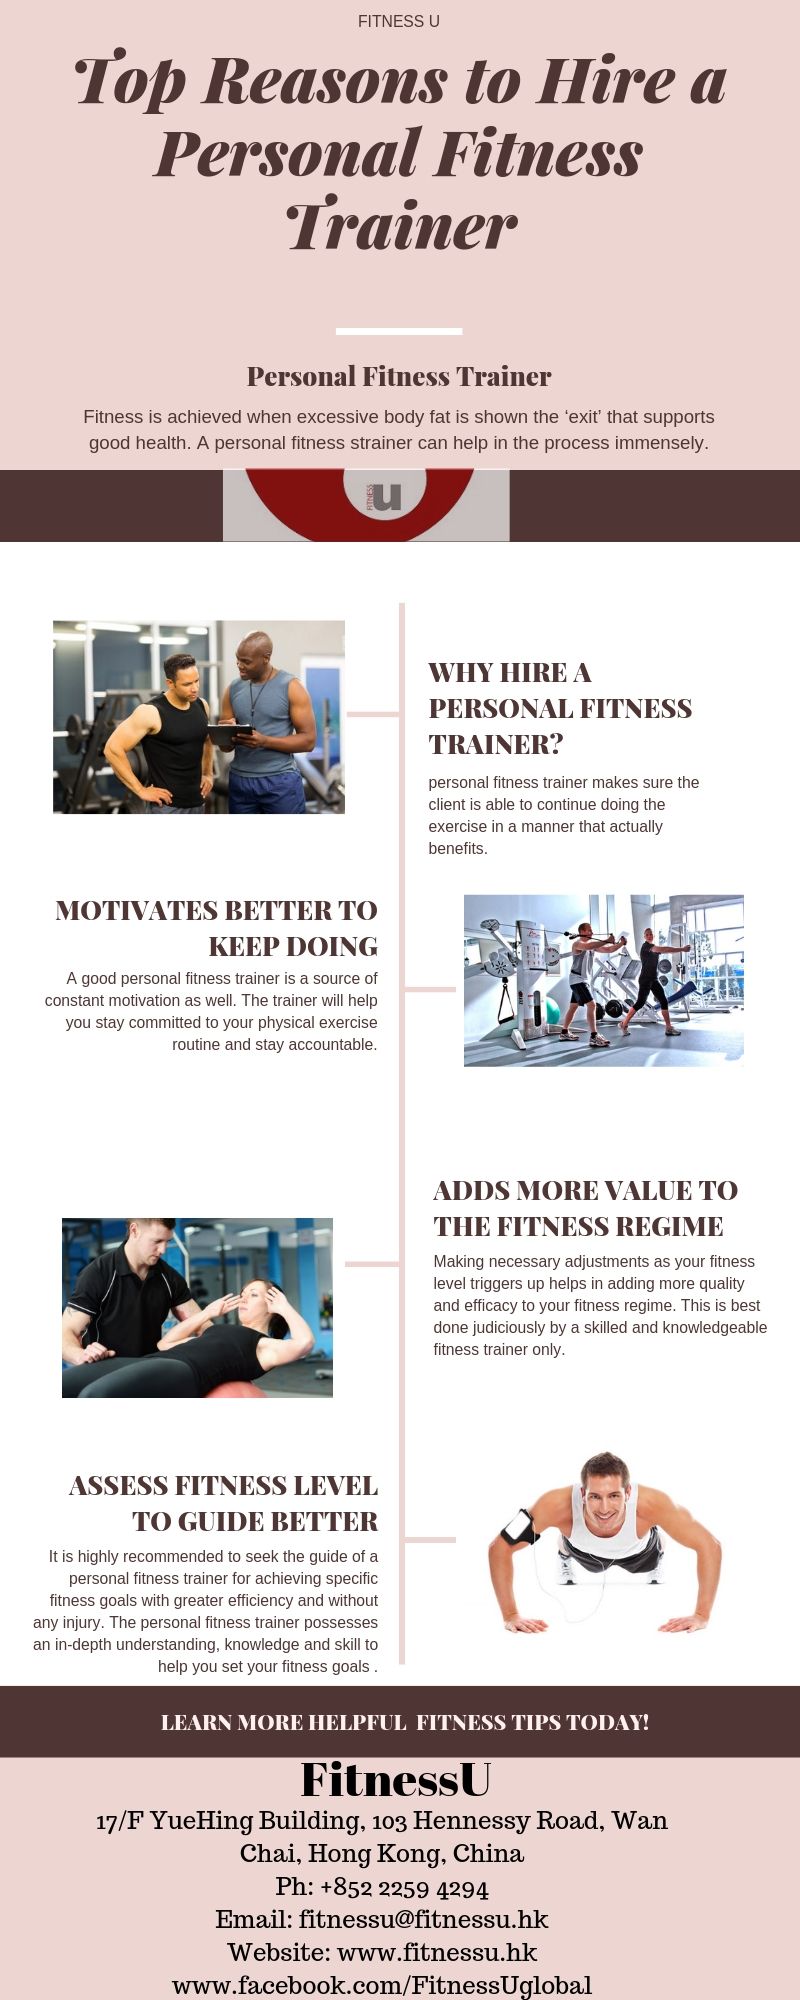 Top Reasons to Hire a Personal Fitness Trainer.jpg Fitness is achieved when excessive body fat is shown the ‘exit’ that supports good health. A personal fitness strainer can help in the process immensely.  More at https://fitnessubolg.blogspot.com/2019/05/top-reasons-to-hire-personal-fitness.html

 by Fitnessu